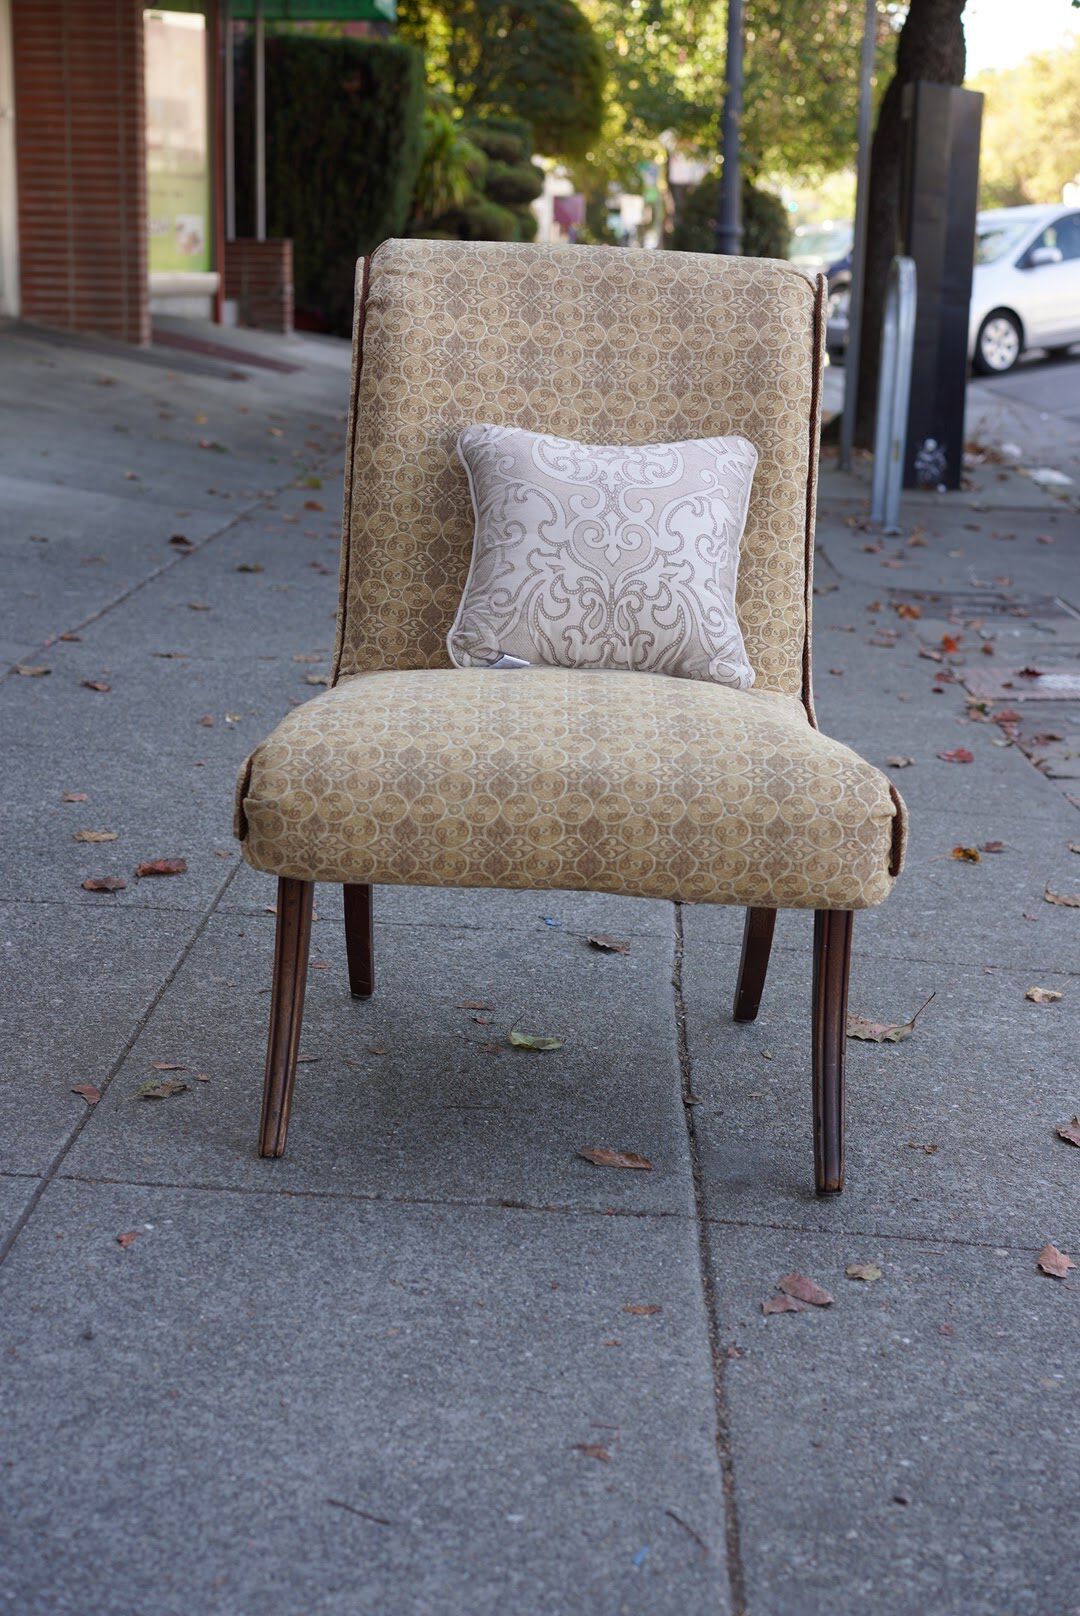 **BARGAIN BUY** #100415 Vintage Rolled Back Earth Toned Patterned Slipper Chair 21" Wide x 31" Deep x 34" Tall